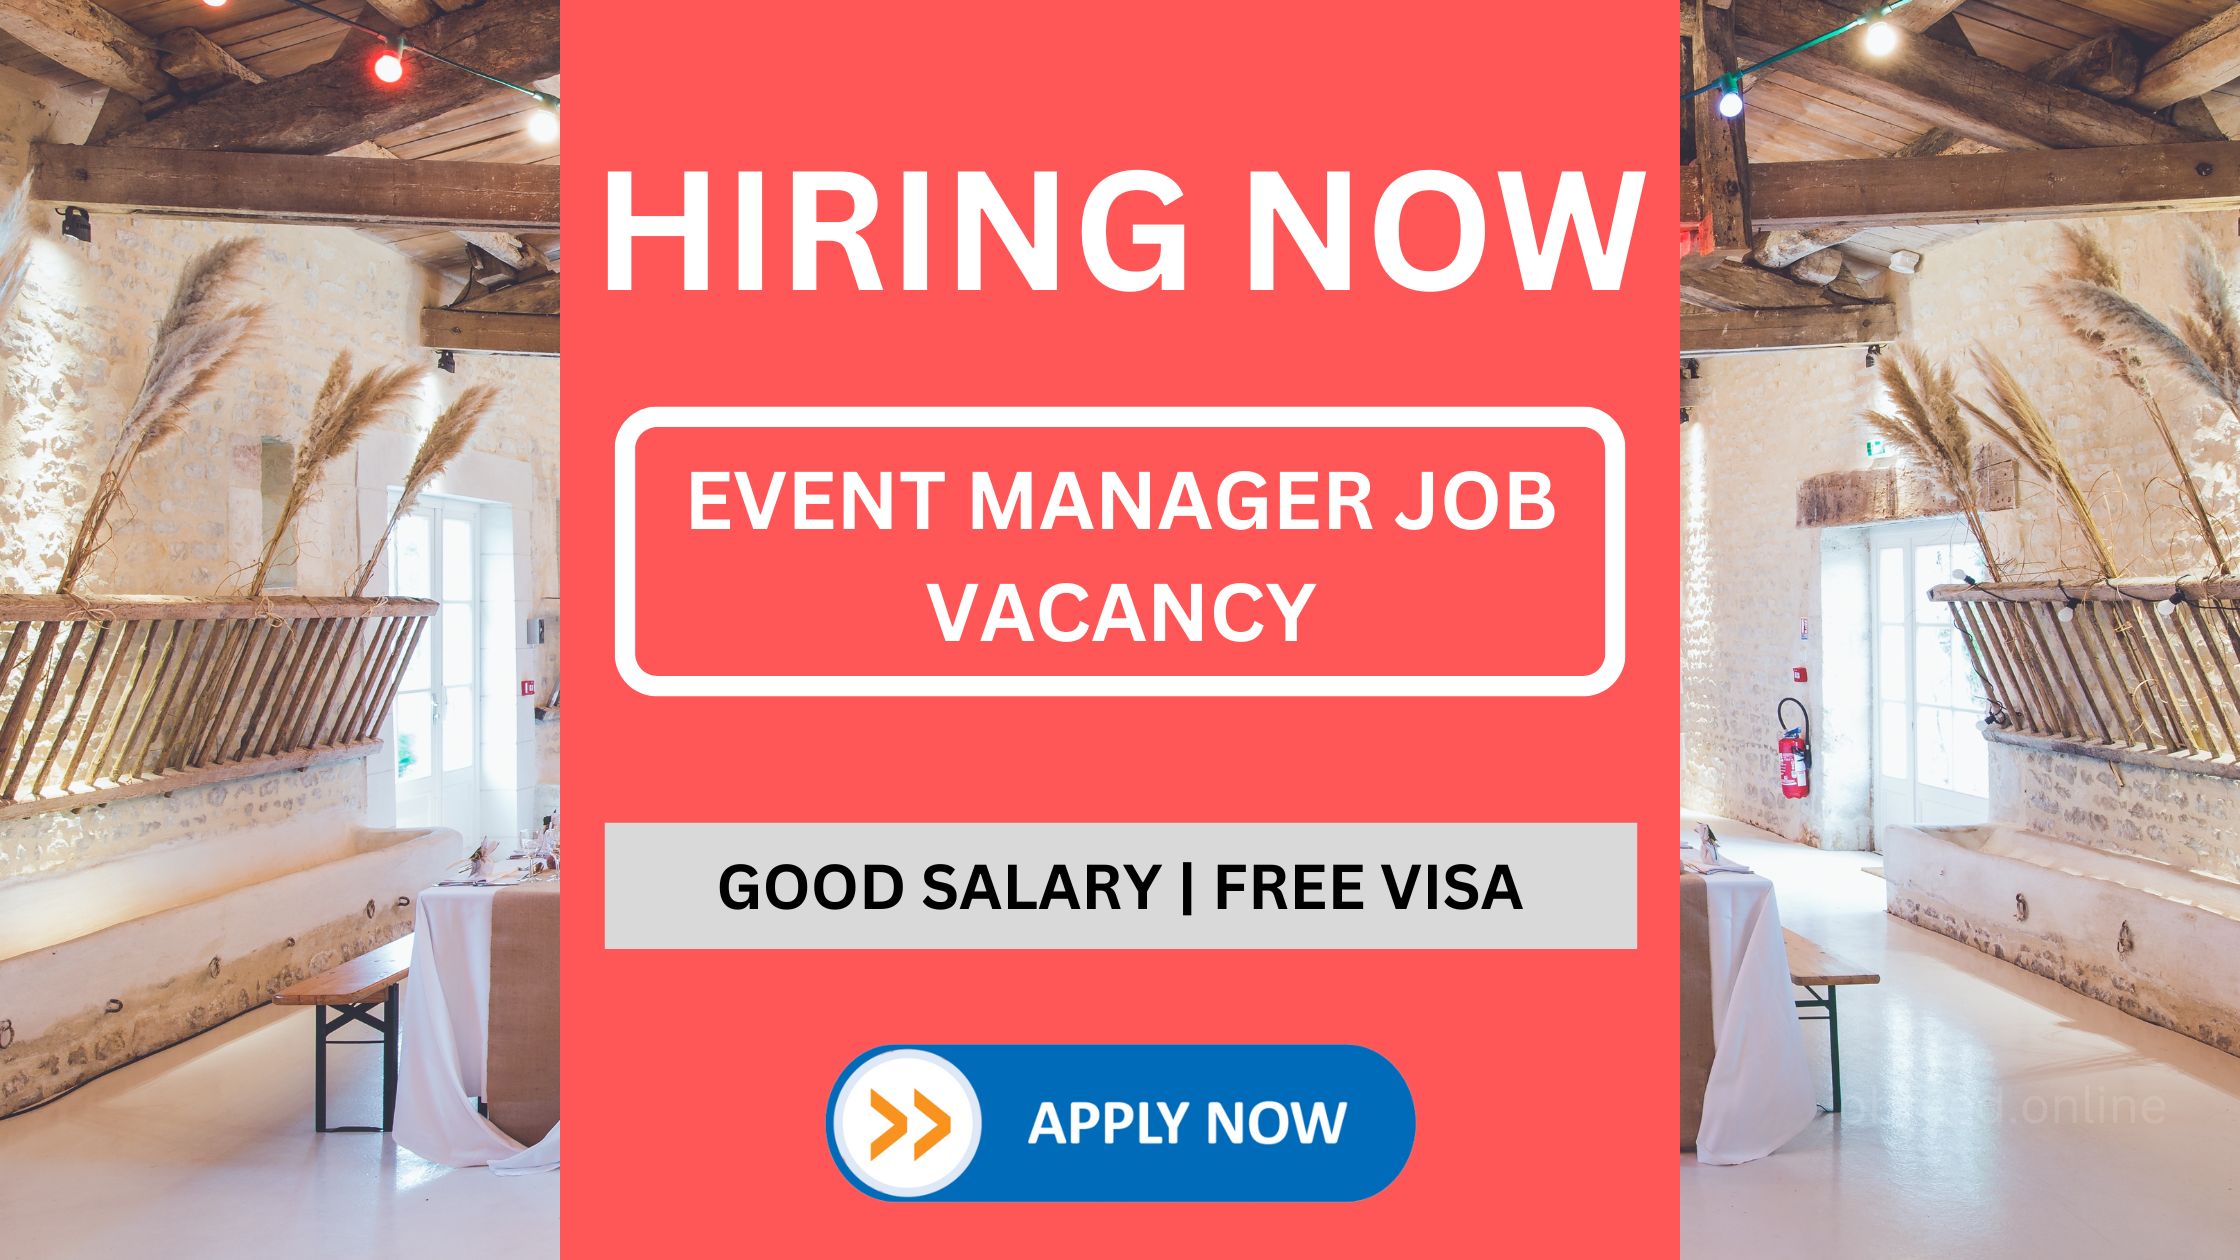 Event Manager Job Vacancy in UAE | High Salary